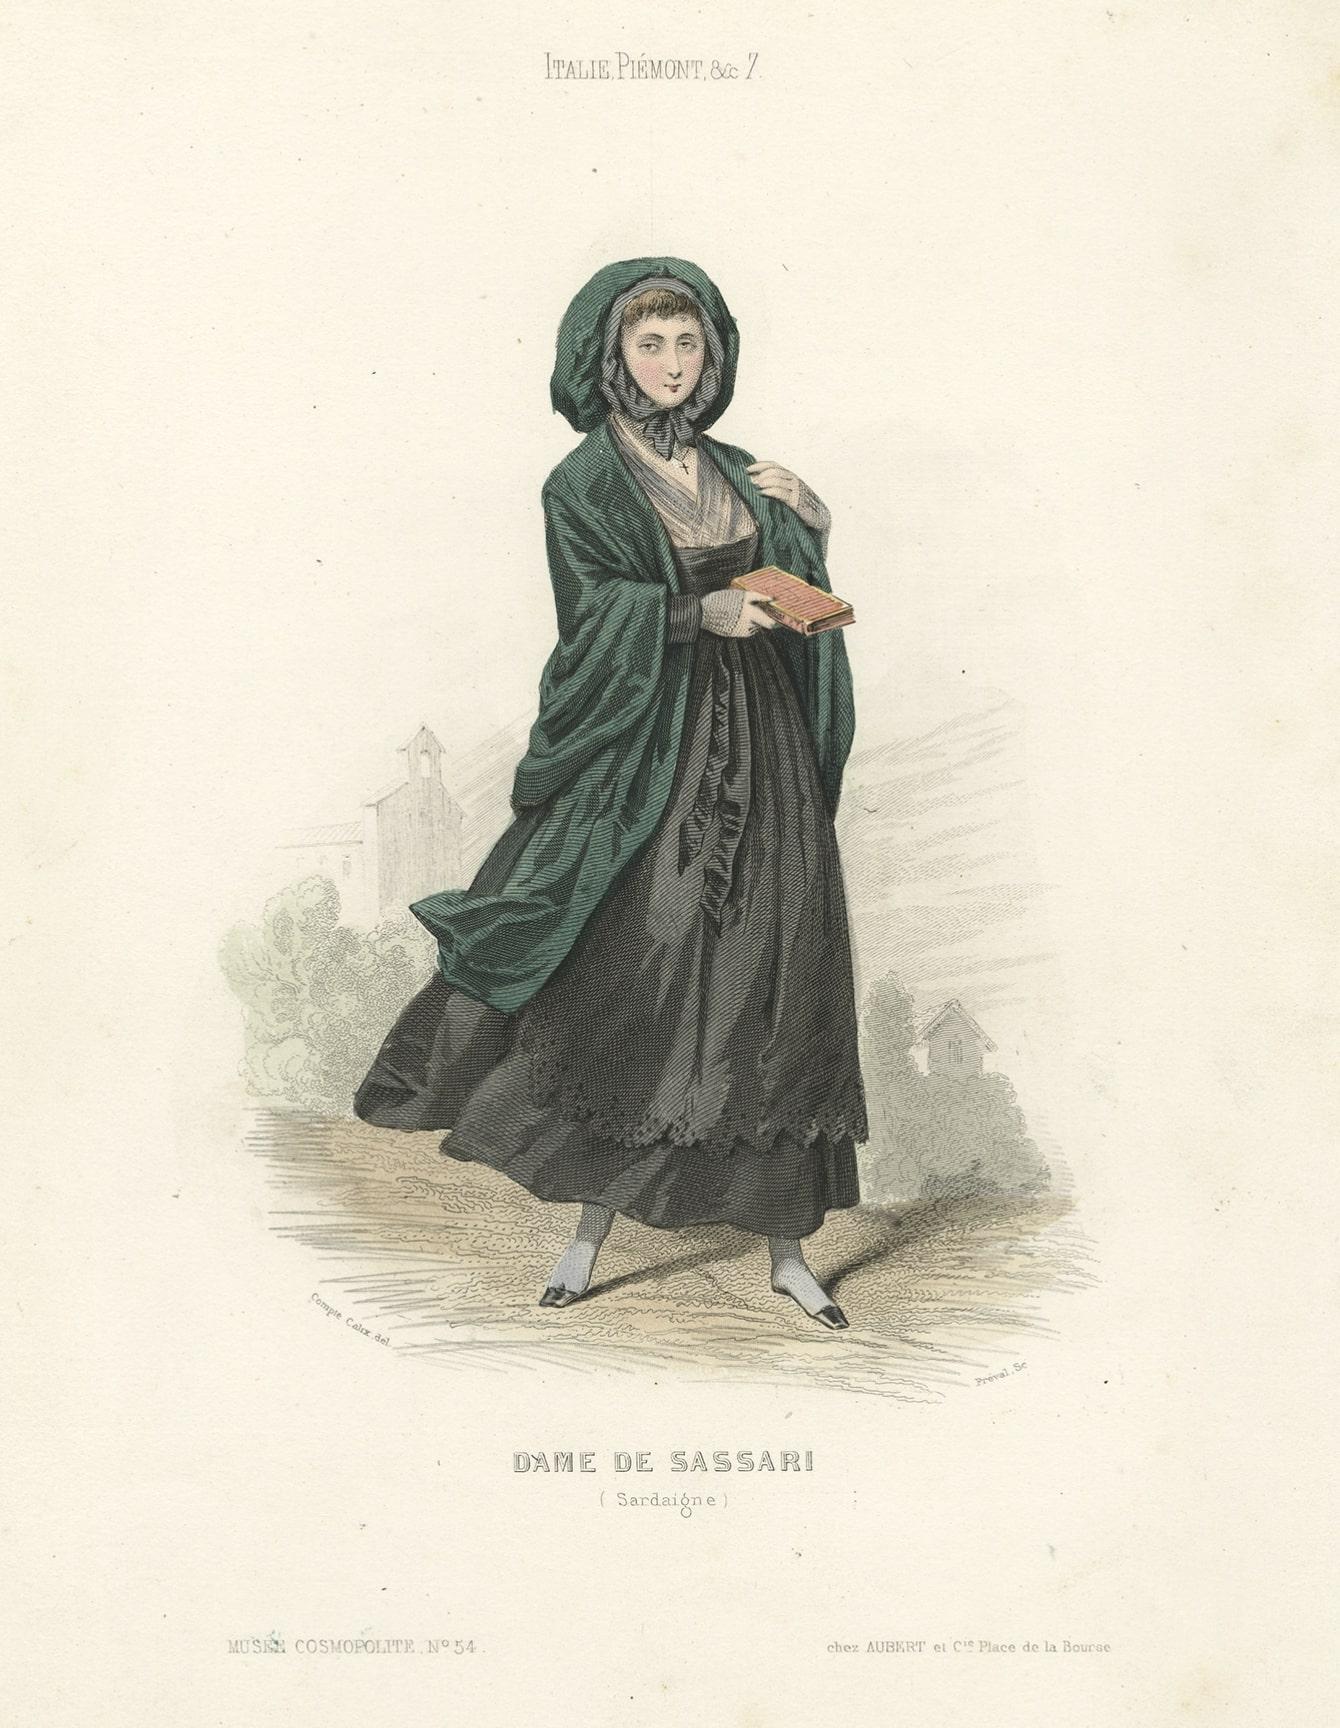 Paper Antique Print of a Lady from Sassari 'Sardinia' in Italy, 1850